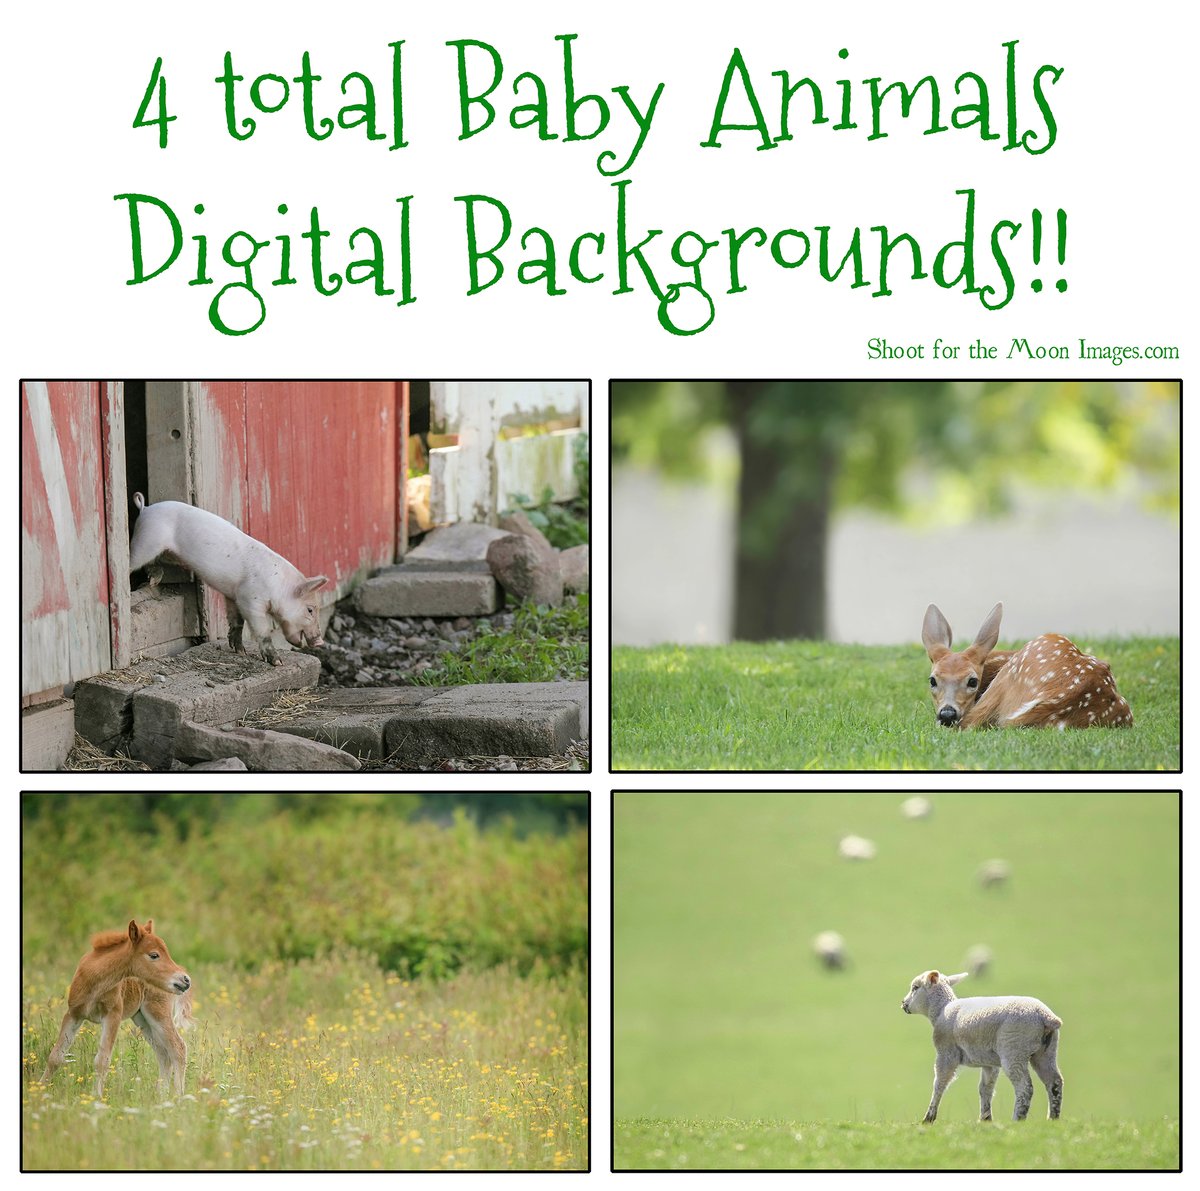 Image of Baby Animals Digital Backgrounds